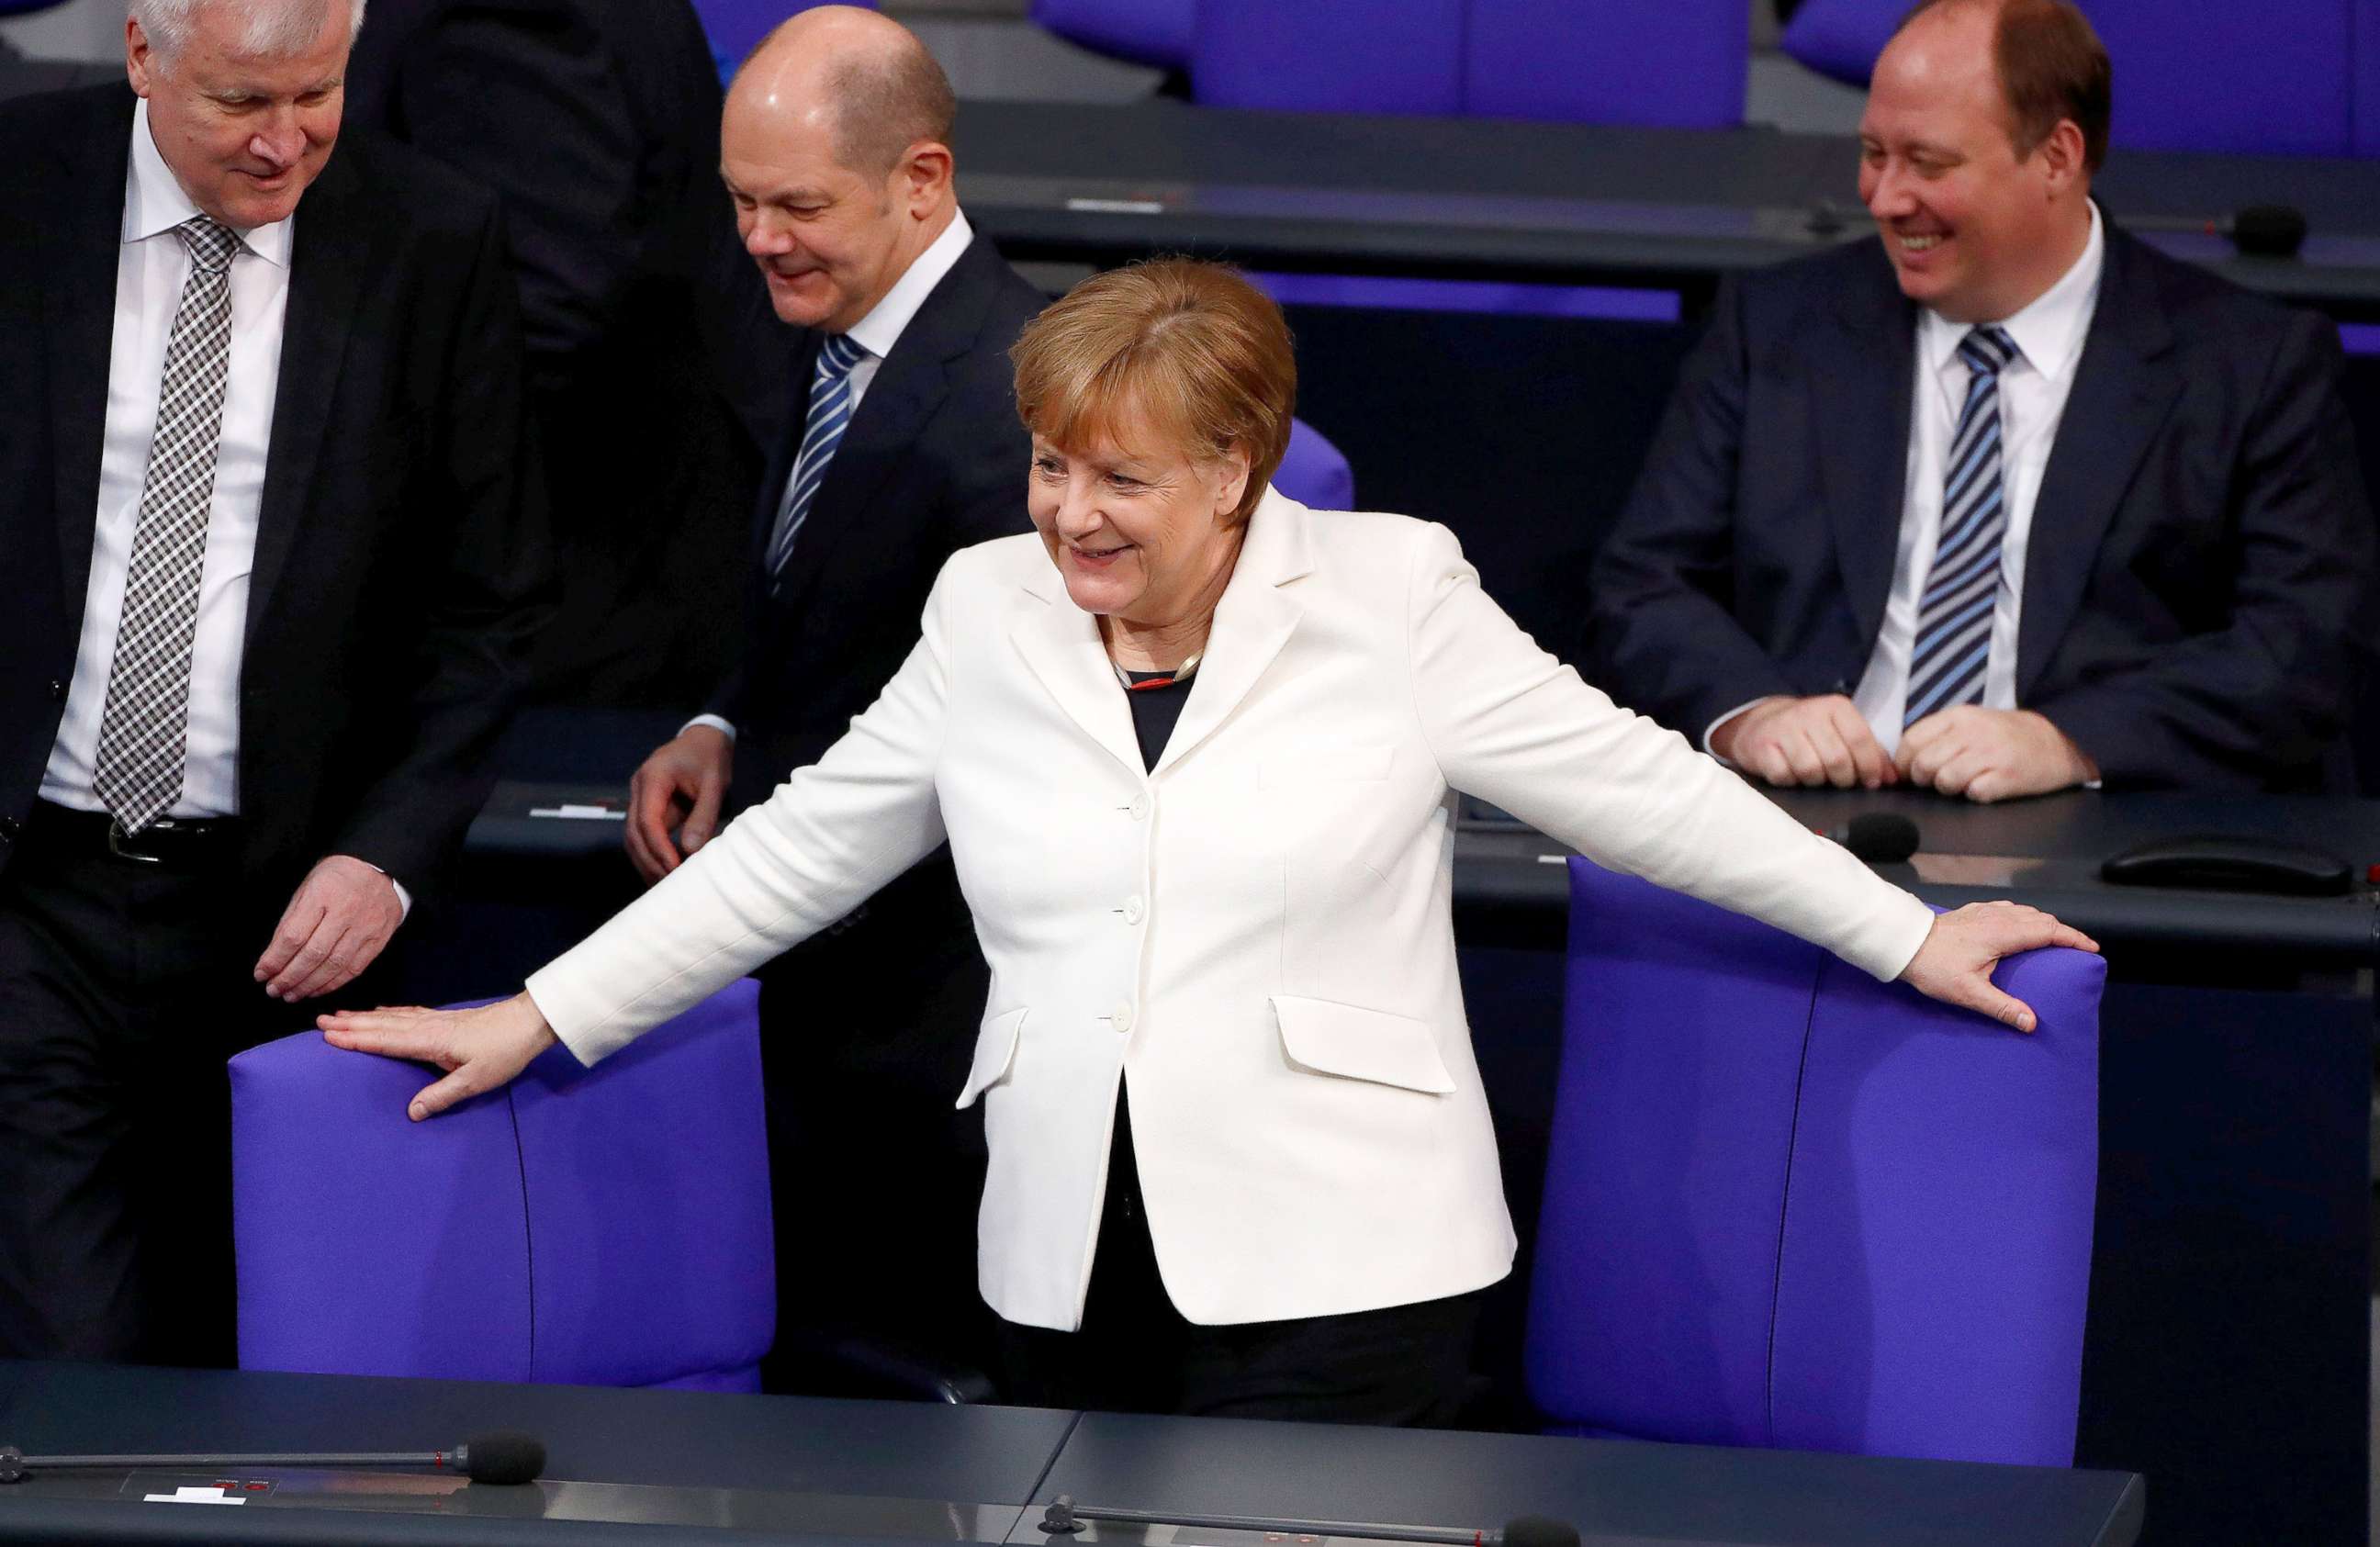 PHOTO: German Chancellor Angela Merkel takes her seat before the swearing-in ceremony of her government in Germany's lower house of parliament Bundestag in Berlin, Germany, March 14, 2018.